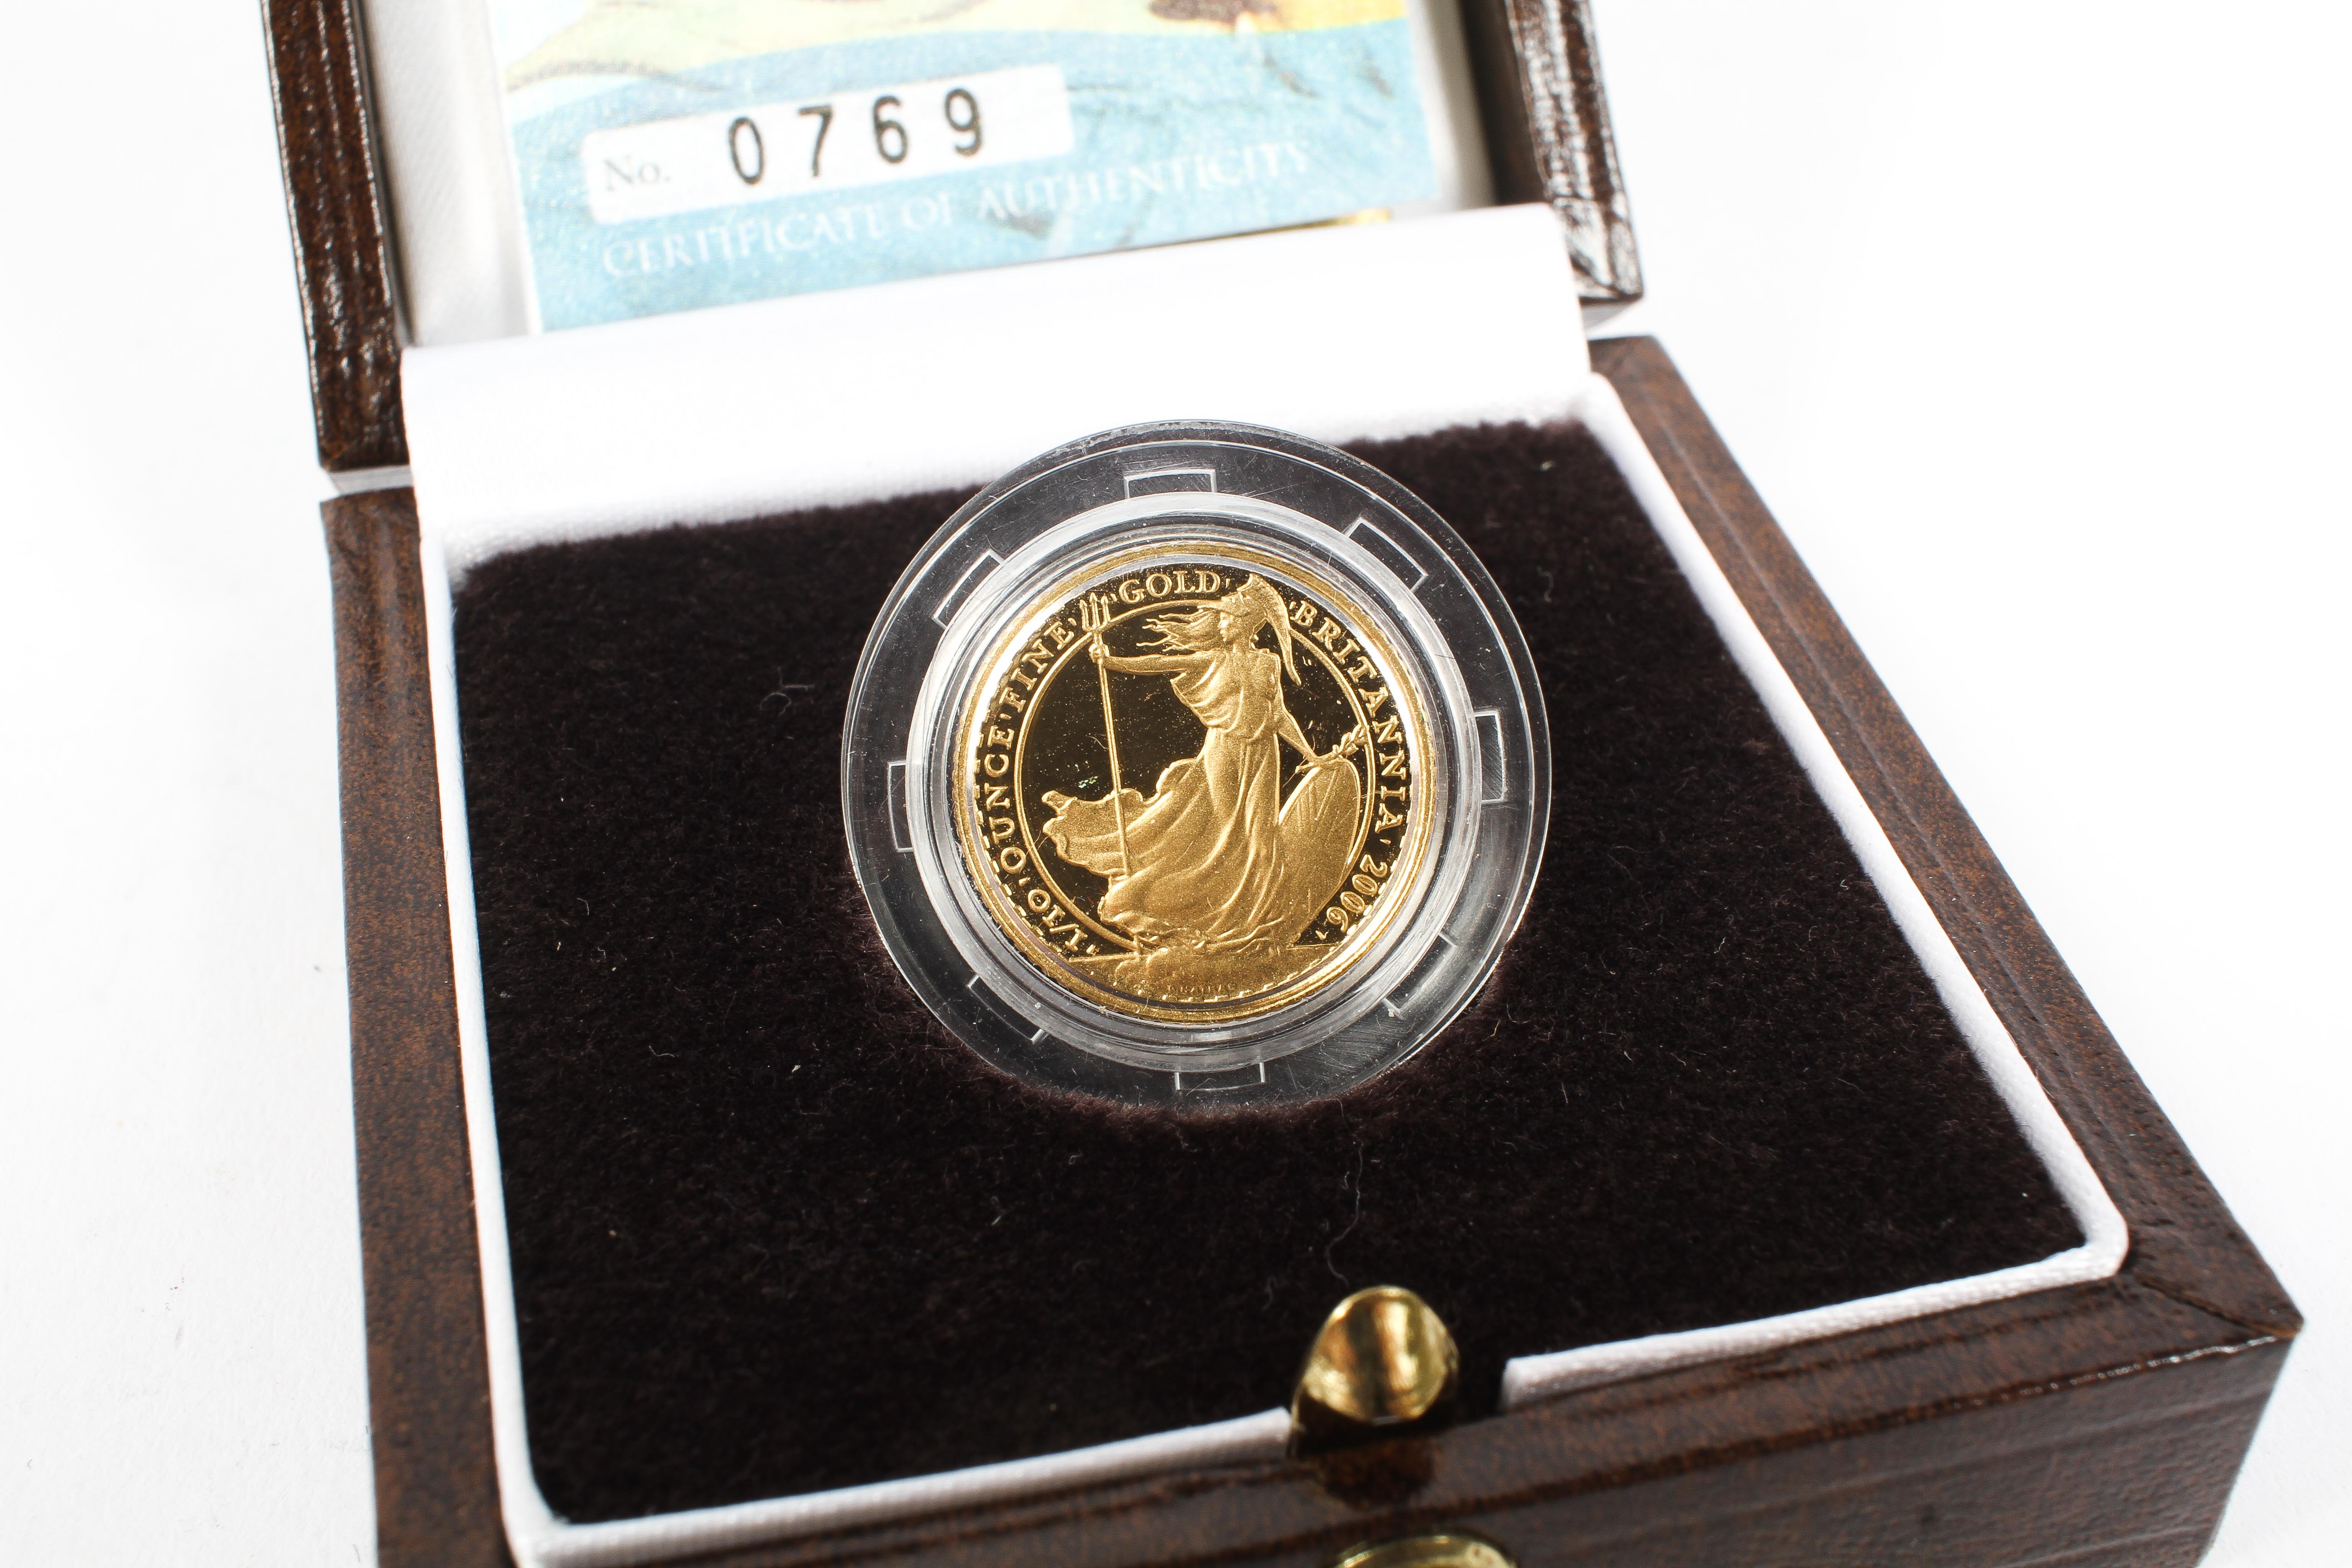 A 2006 Britannia Gold proof £10 coin. - Image 2 of 2